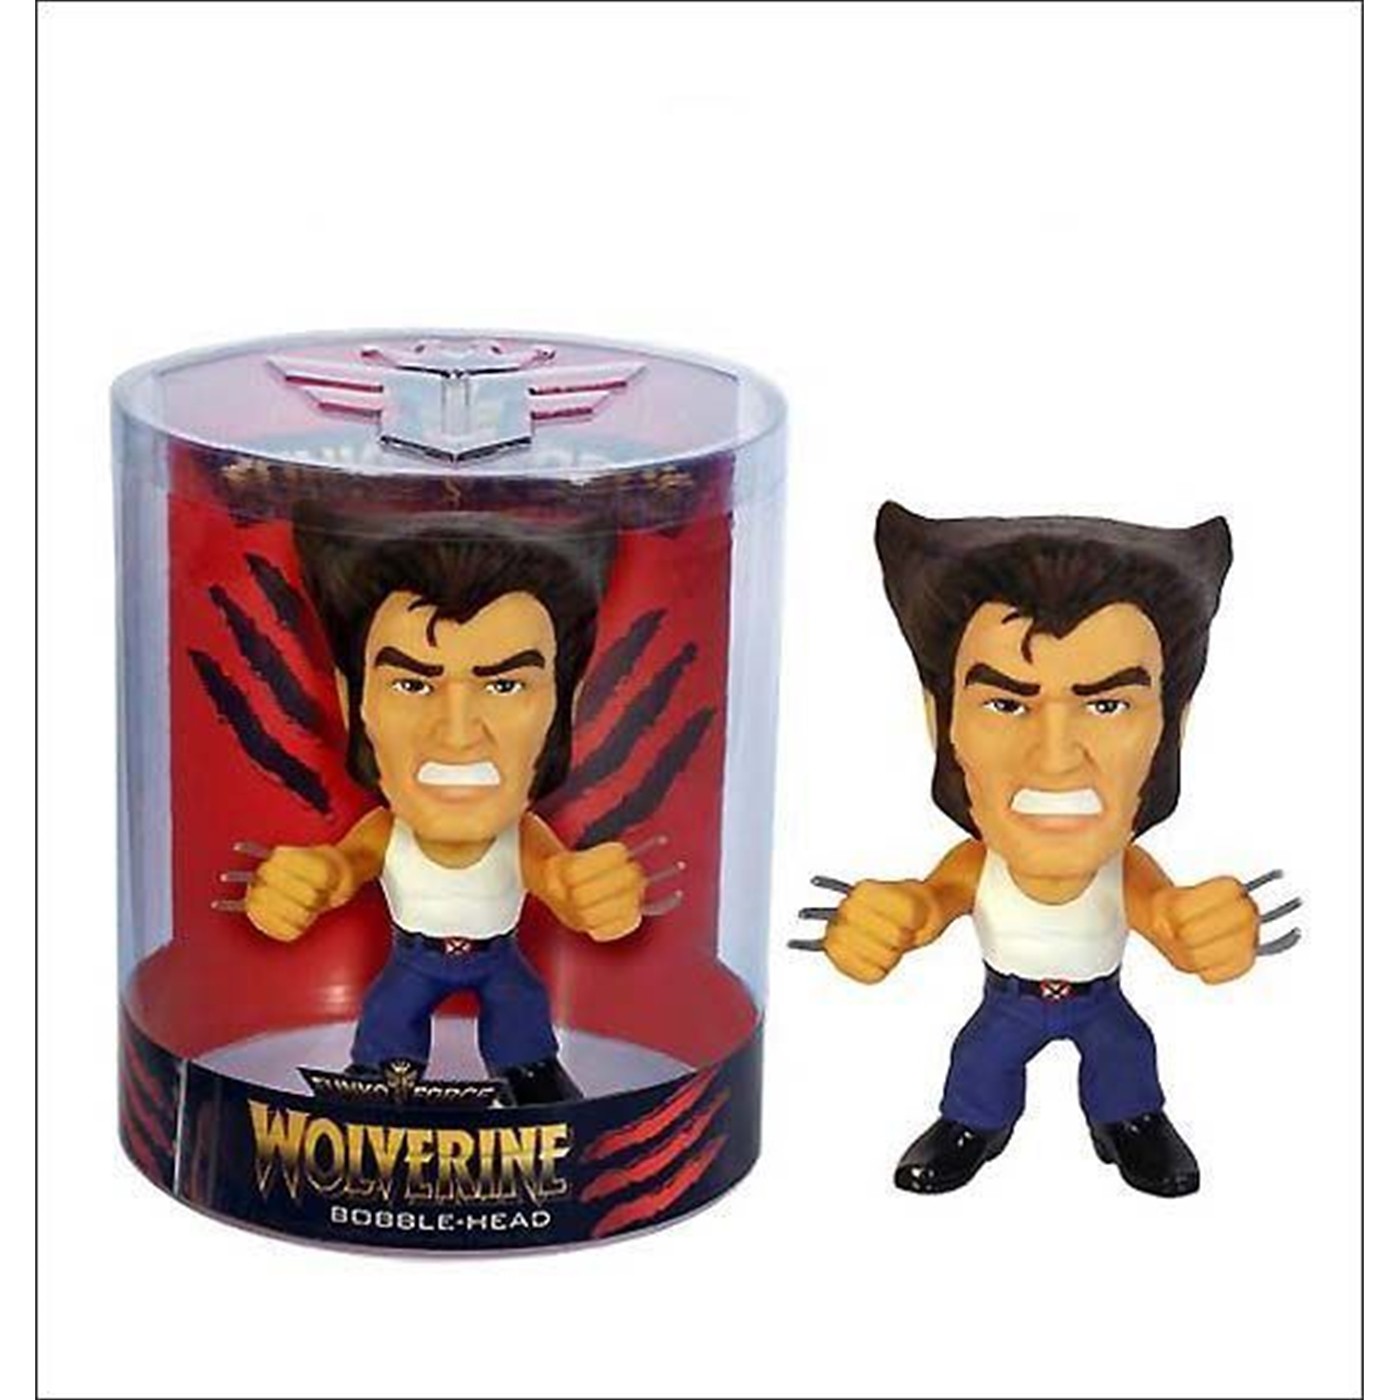 Wolverine Movie T-Shirt and Blue Jeans Bobblehead Headk